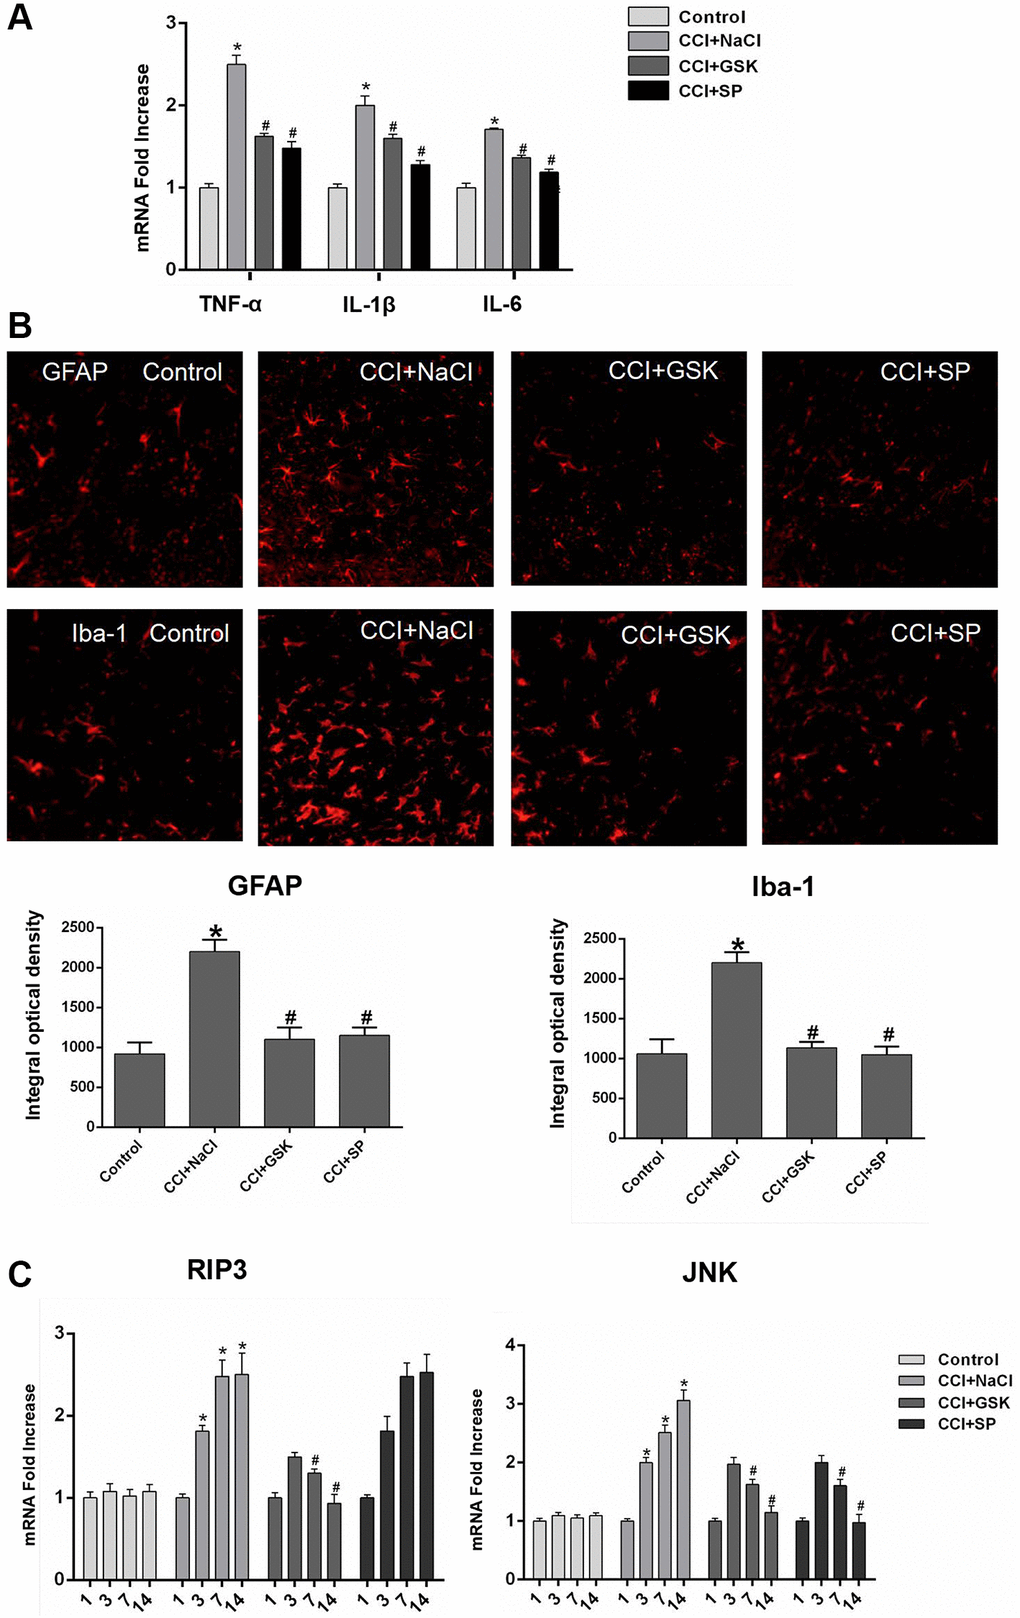 The mRNA expressions of inflammatory cytokines, RIP3 and JNK in the lumbar spinal cords of CCI rats with qRT-PCR. (A) The mRNA expressions of TNF-α, IL-1β and IL-6 in the lumbar spinal on 14th day after CCI. (B) The expression of GFAP and Iba-1 in lumbar spinal cord by immunofluorescence on 14 days after CCI. (C) The mRNA levels of RIP3 and JNK in the lumbar spinal on 1 day before CCI and 3, 7, and 14 days after CCI. Data are presented as mean SD (n = 8). *P #P 